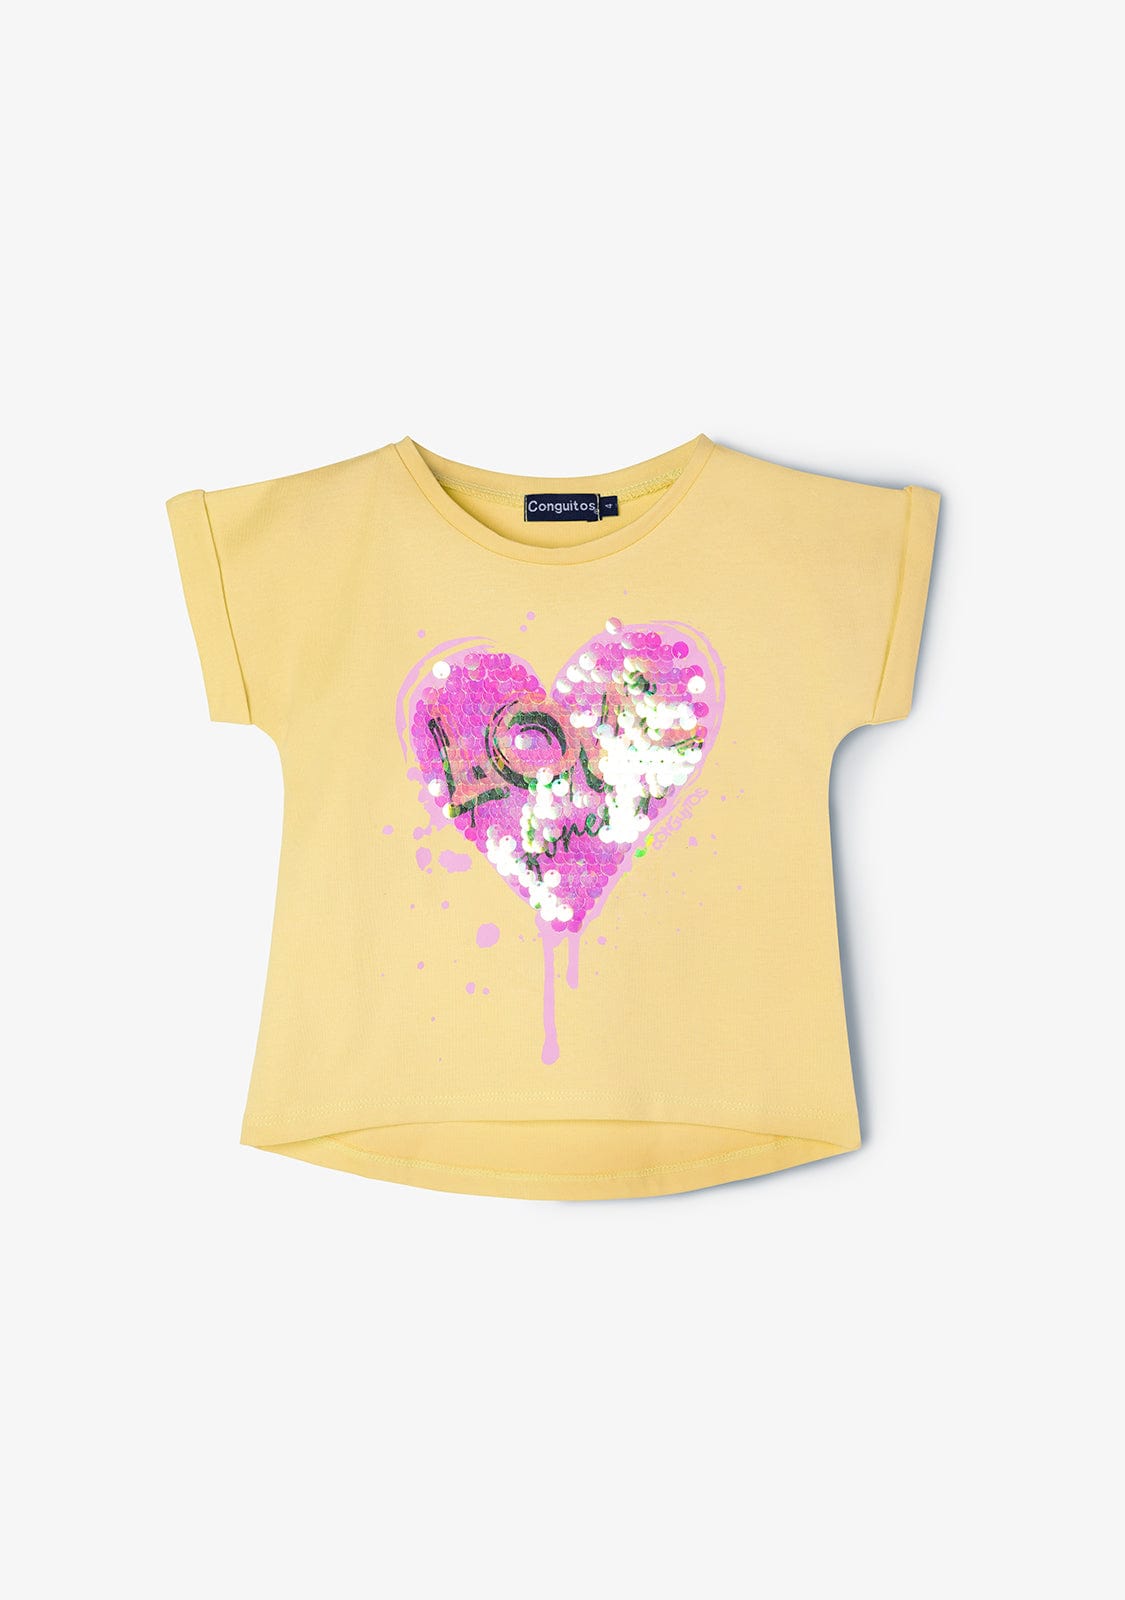 CONGUITOS TEXTIL Clothing Girl's Yellow Love Sequins T-shirt